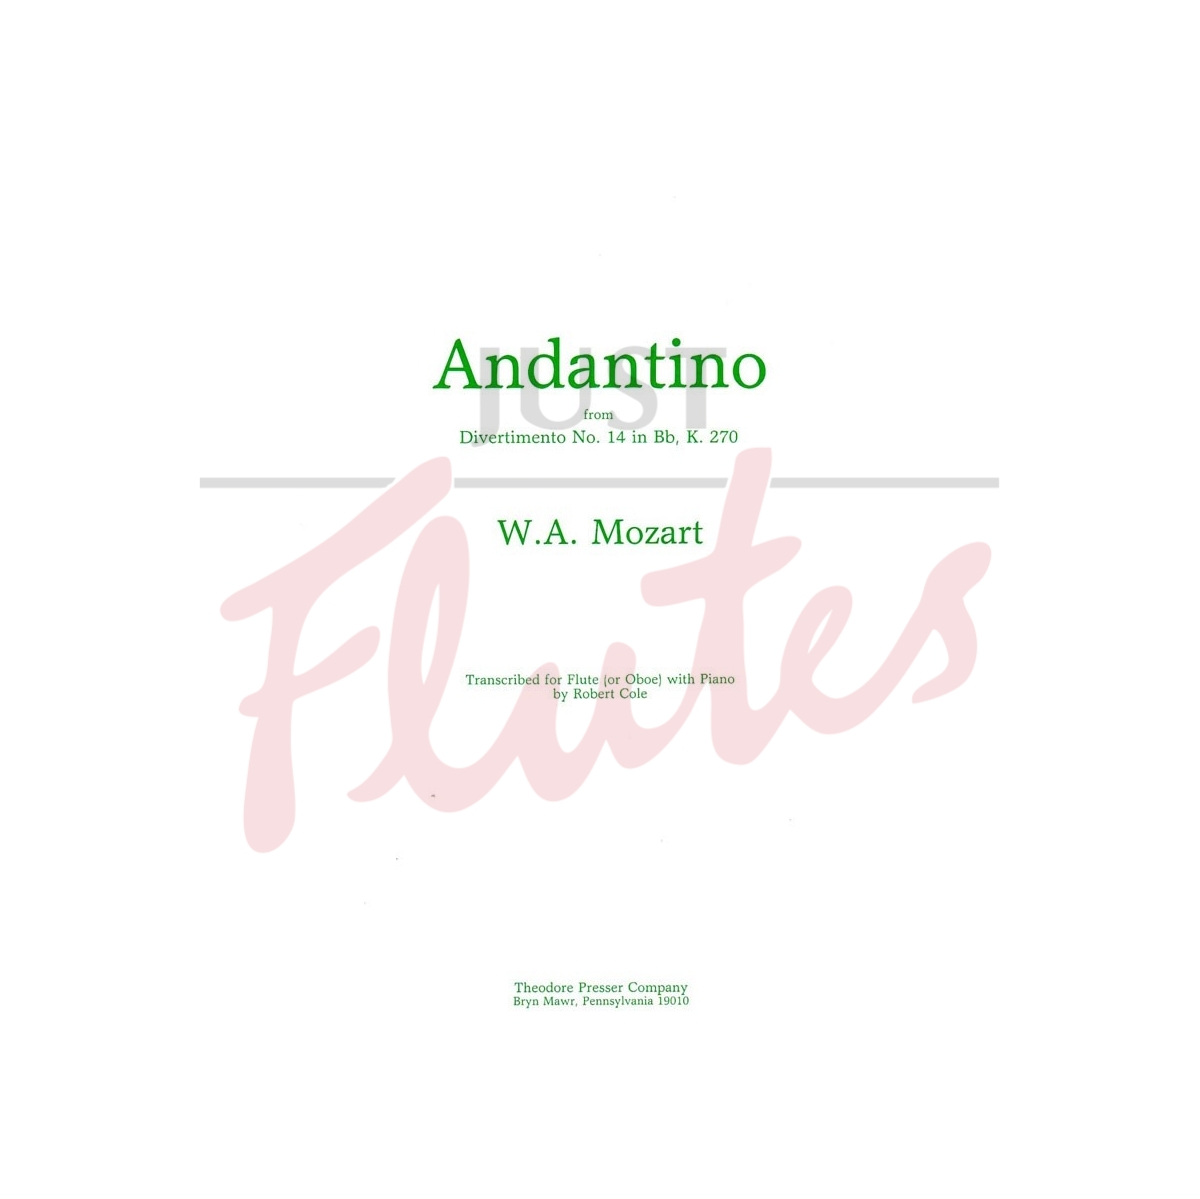 Andantino from Divertimento No 14 in B flat major arranged for flute and piano